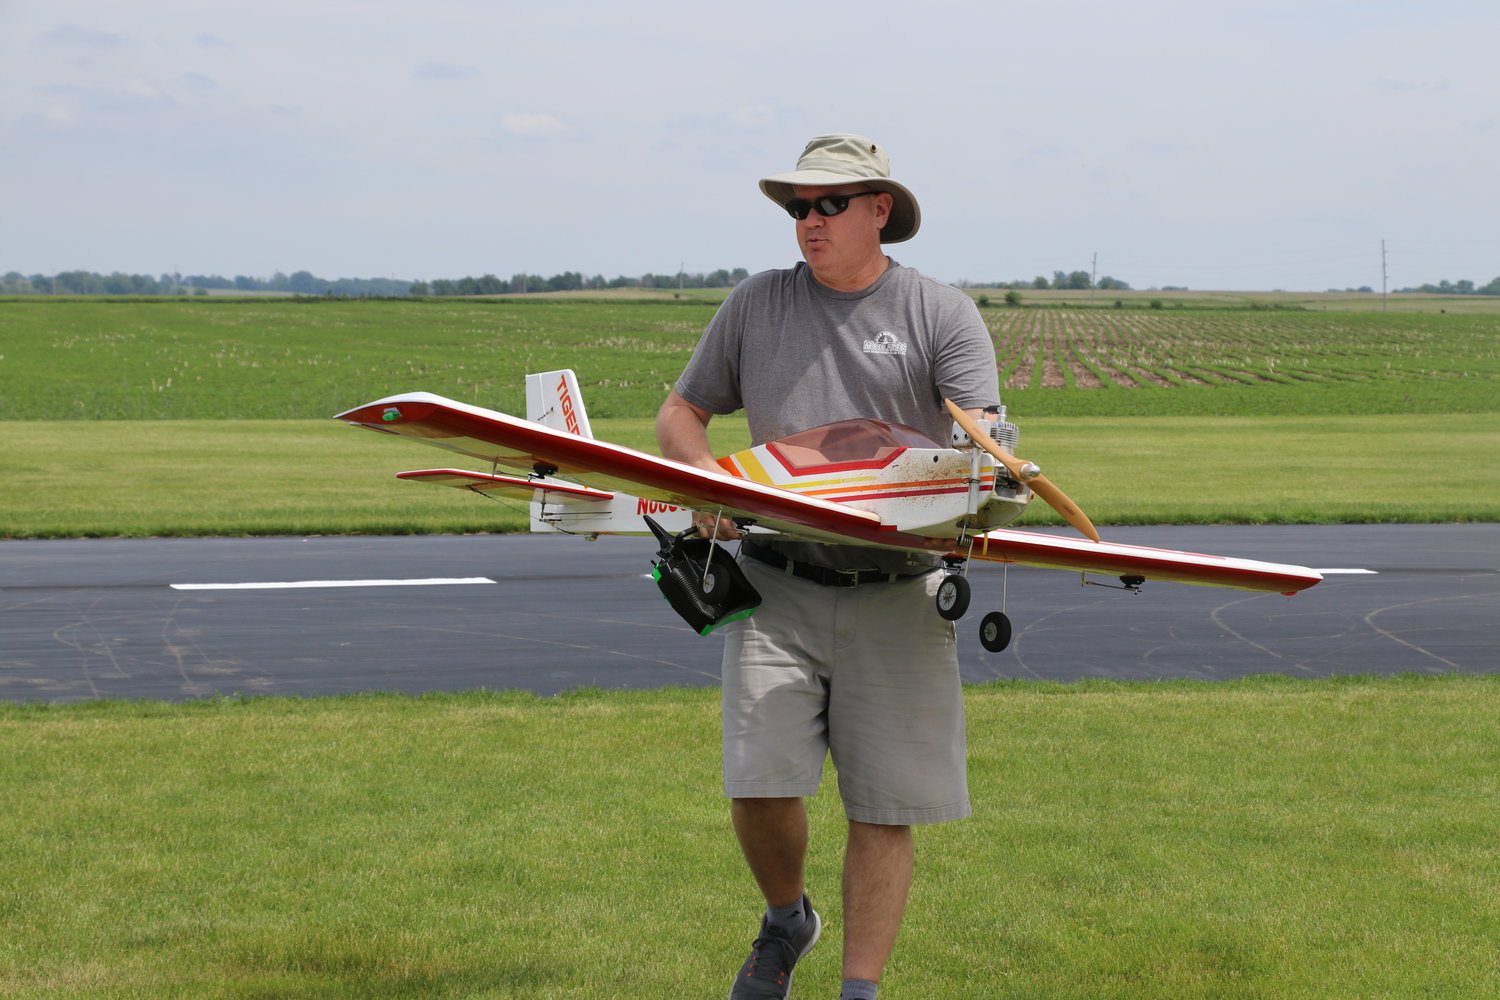 Richard Huyck carries his plane off the airfield after a flight.